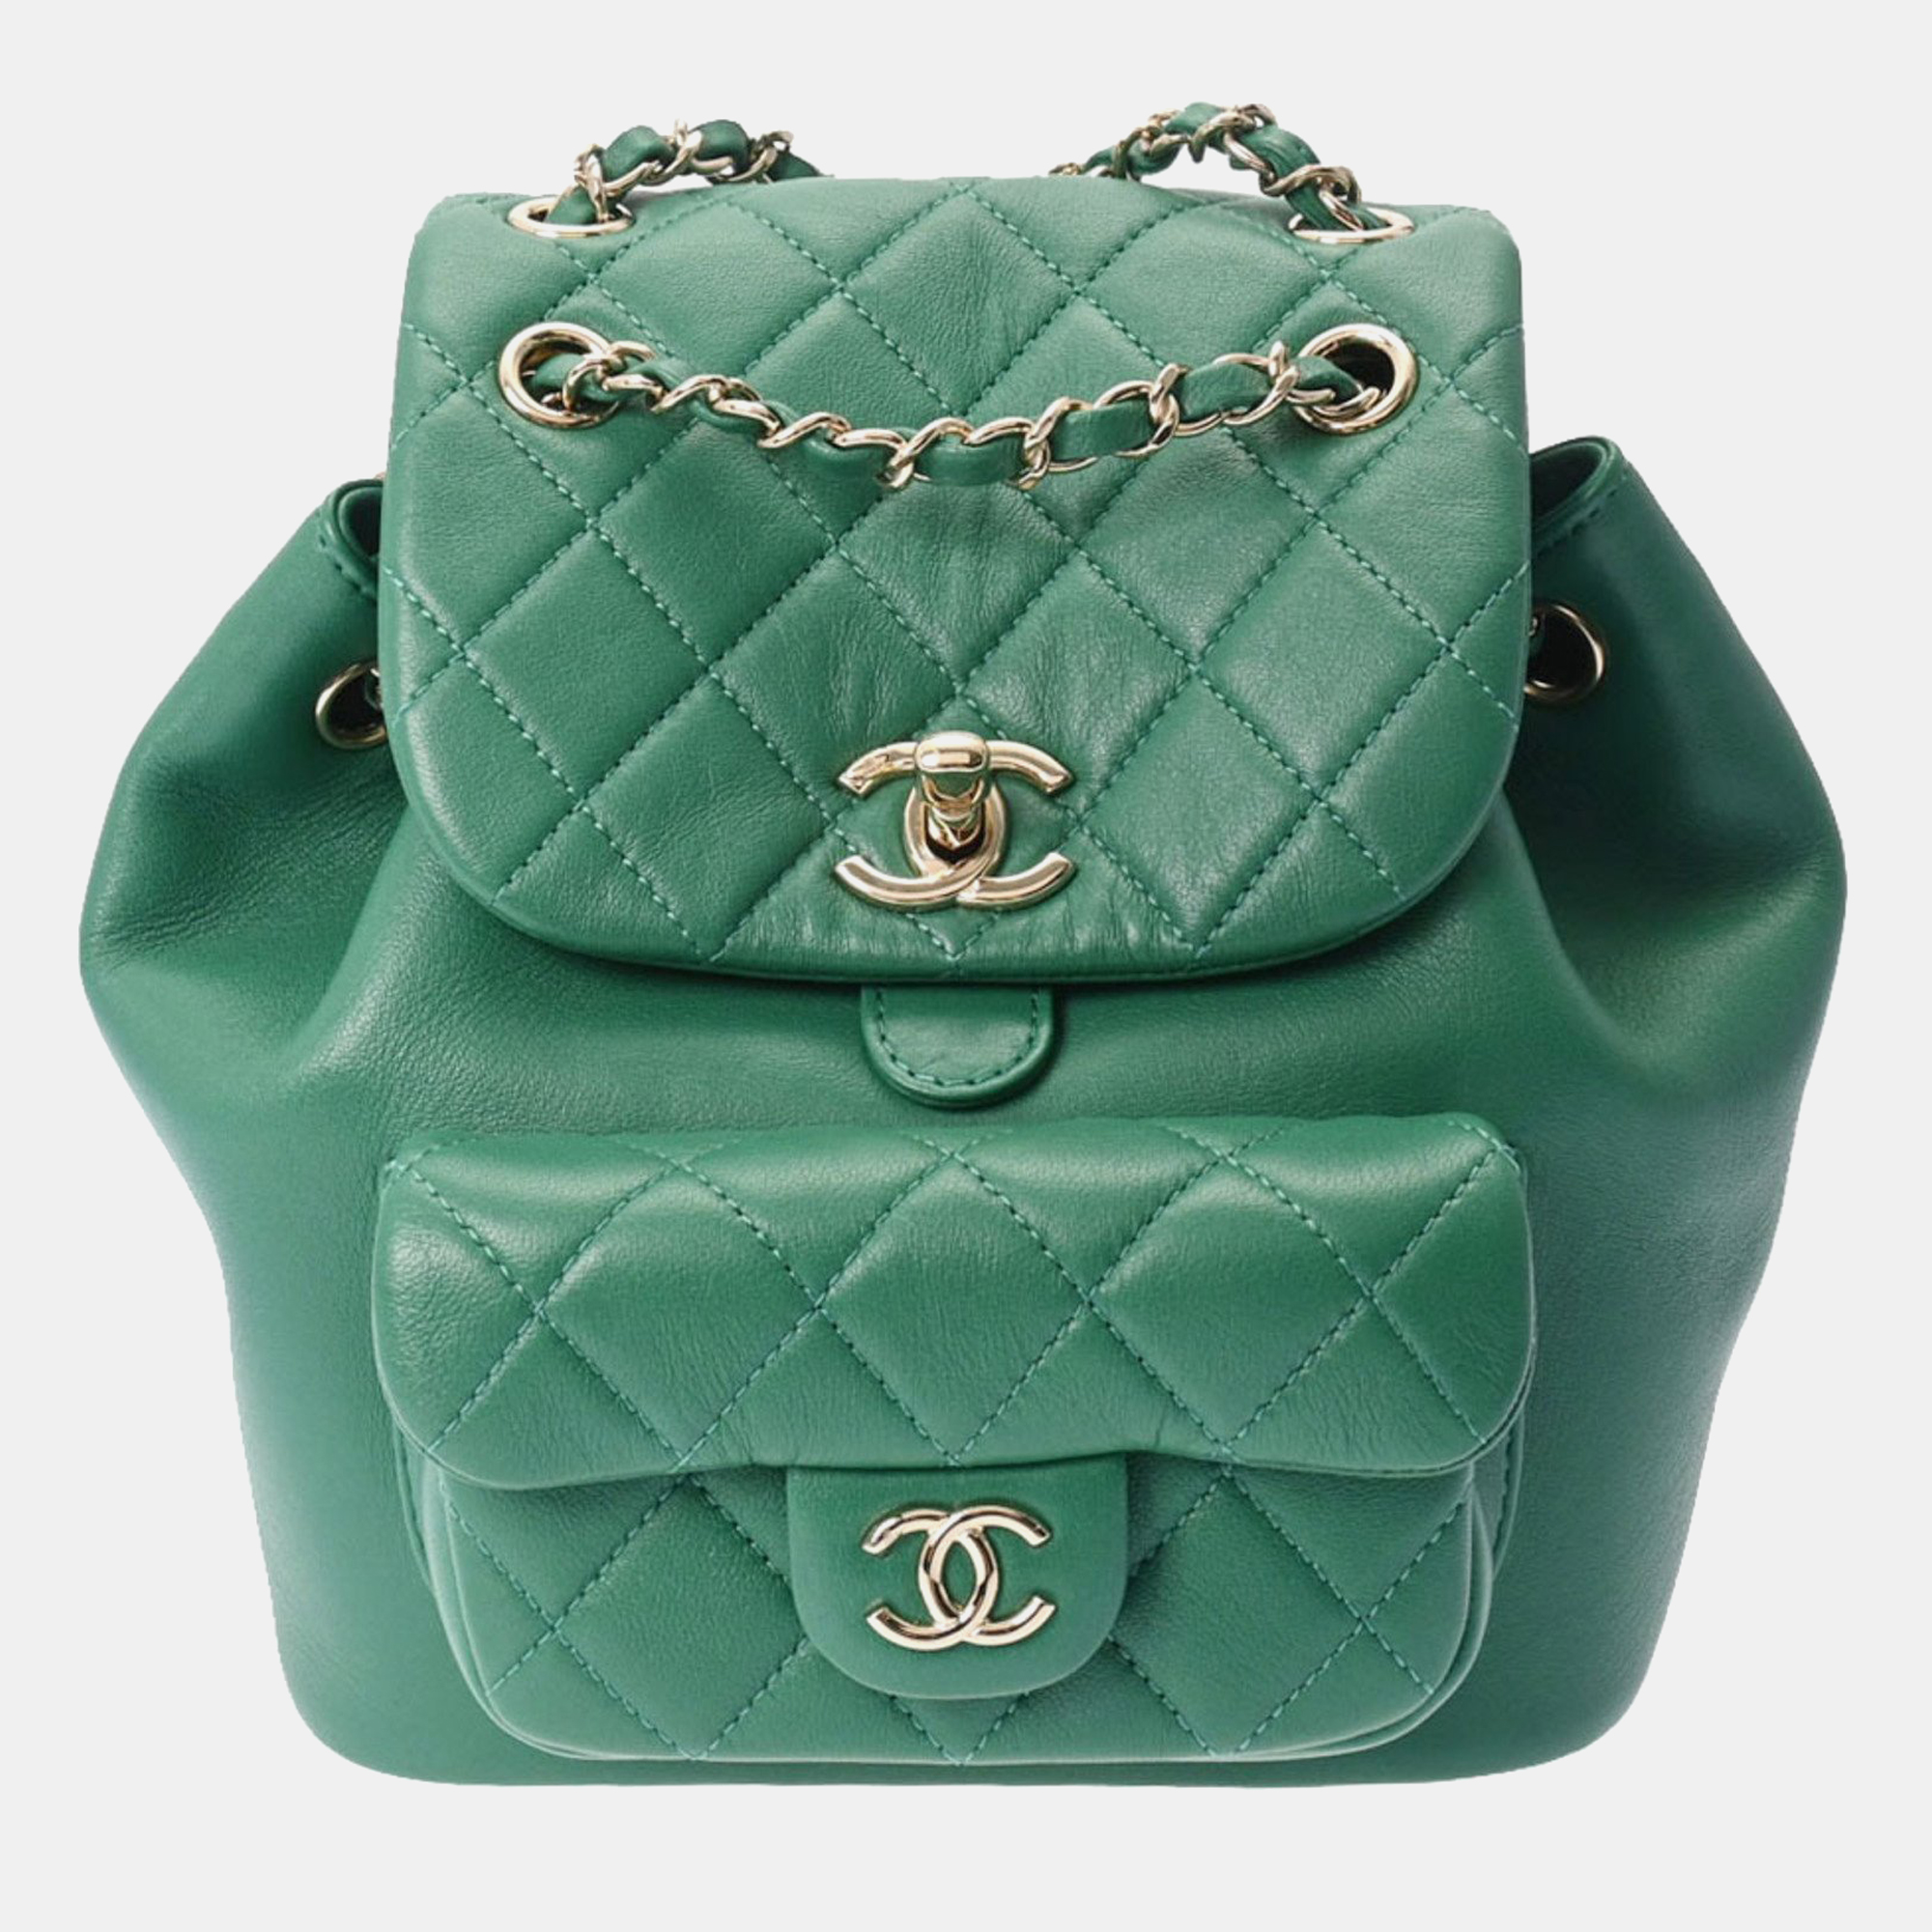 Chanel green leather small duma backpack